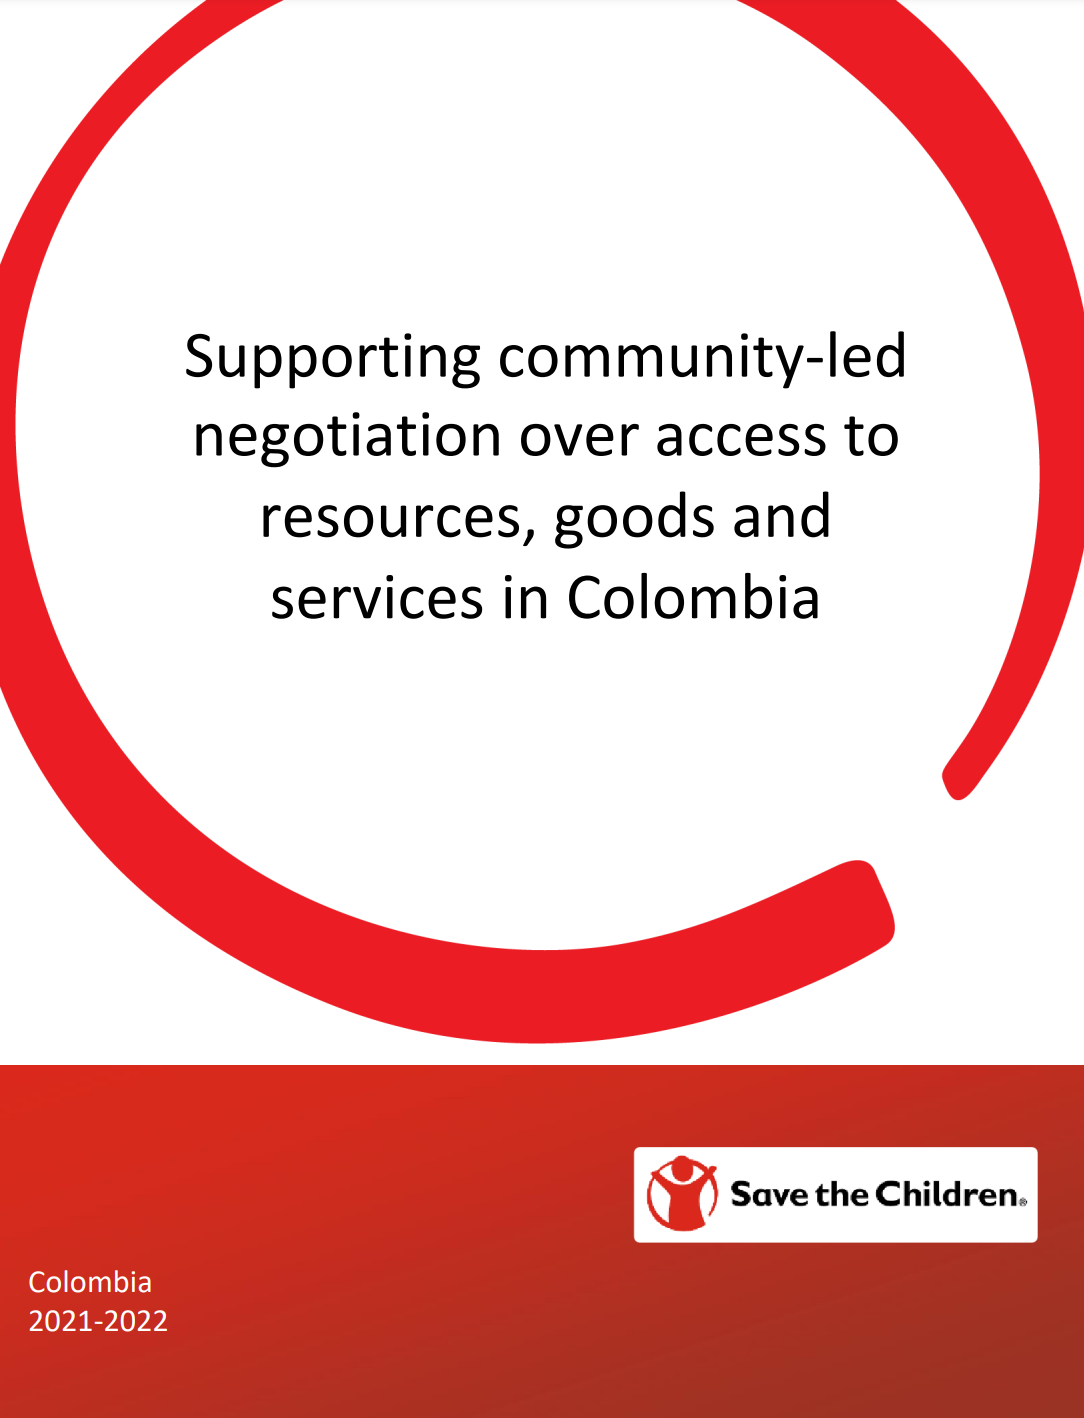 Supporting Community-Led Negotiation Over Access to Resources, Goods and Services in Colombia